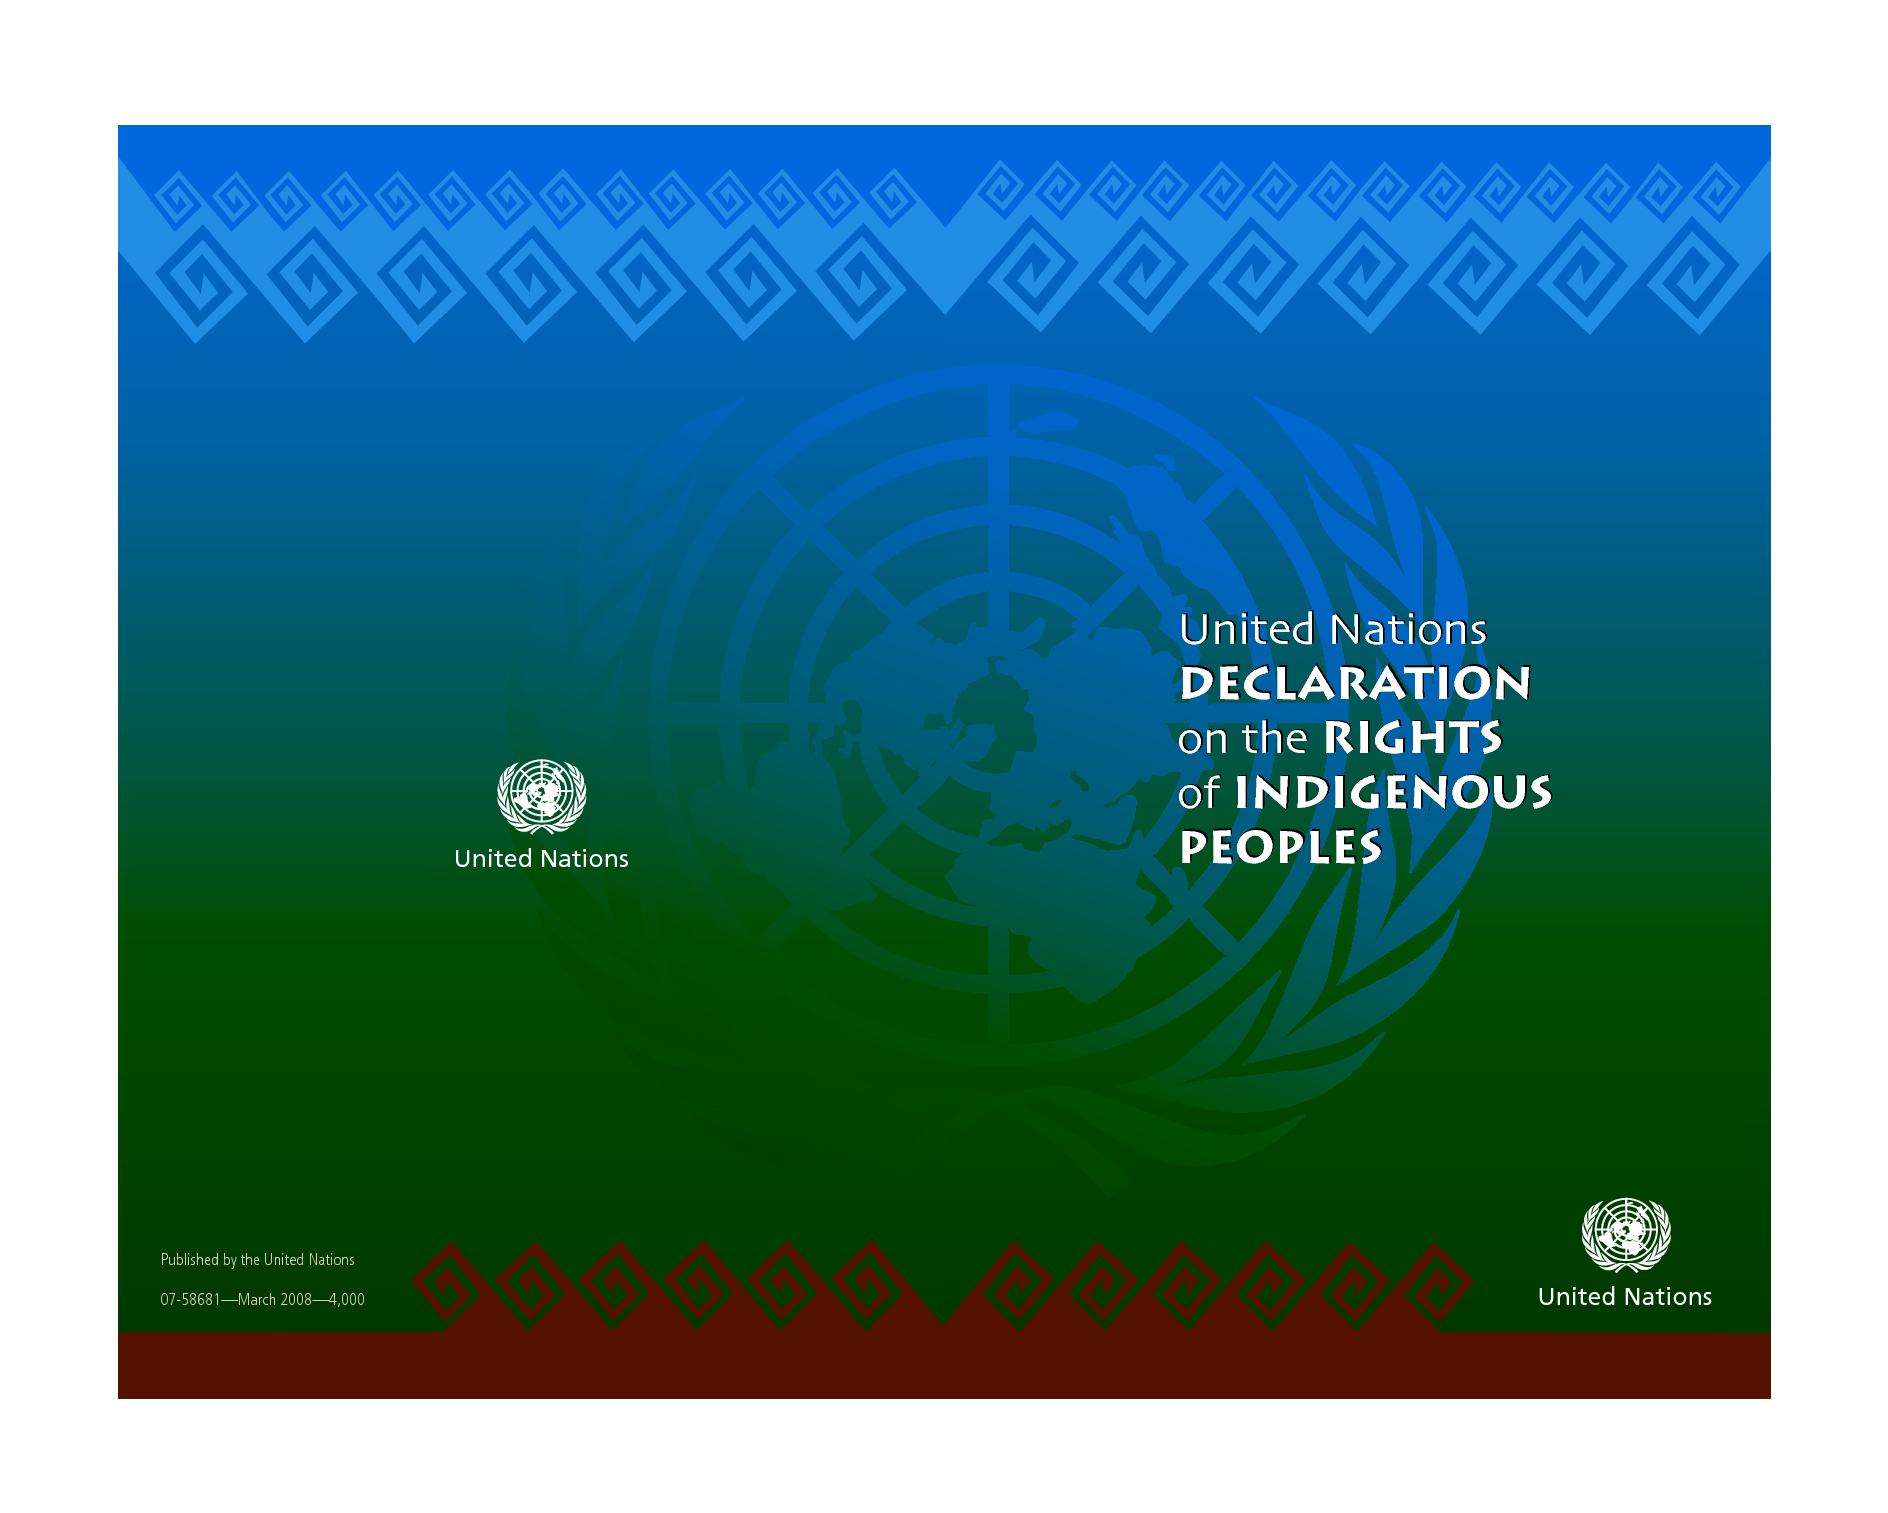 Front and back cover spread of the United Declaration of the Rights of Indigenous Peoples